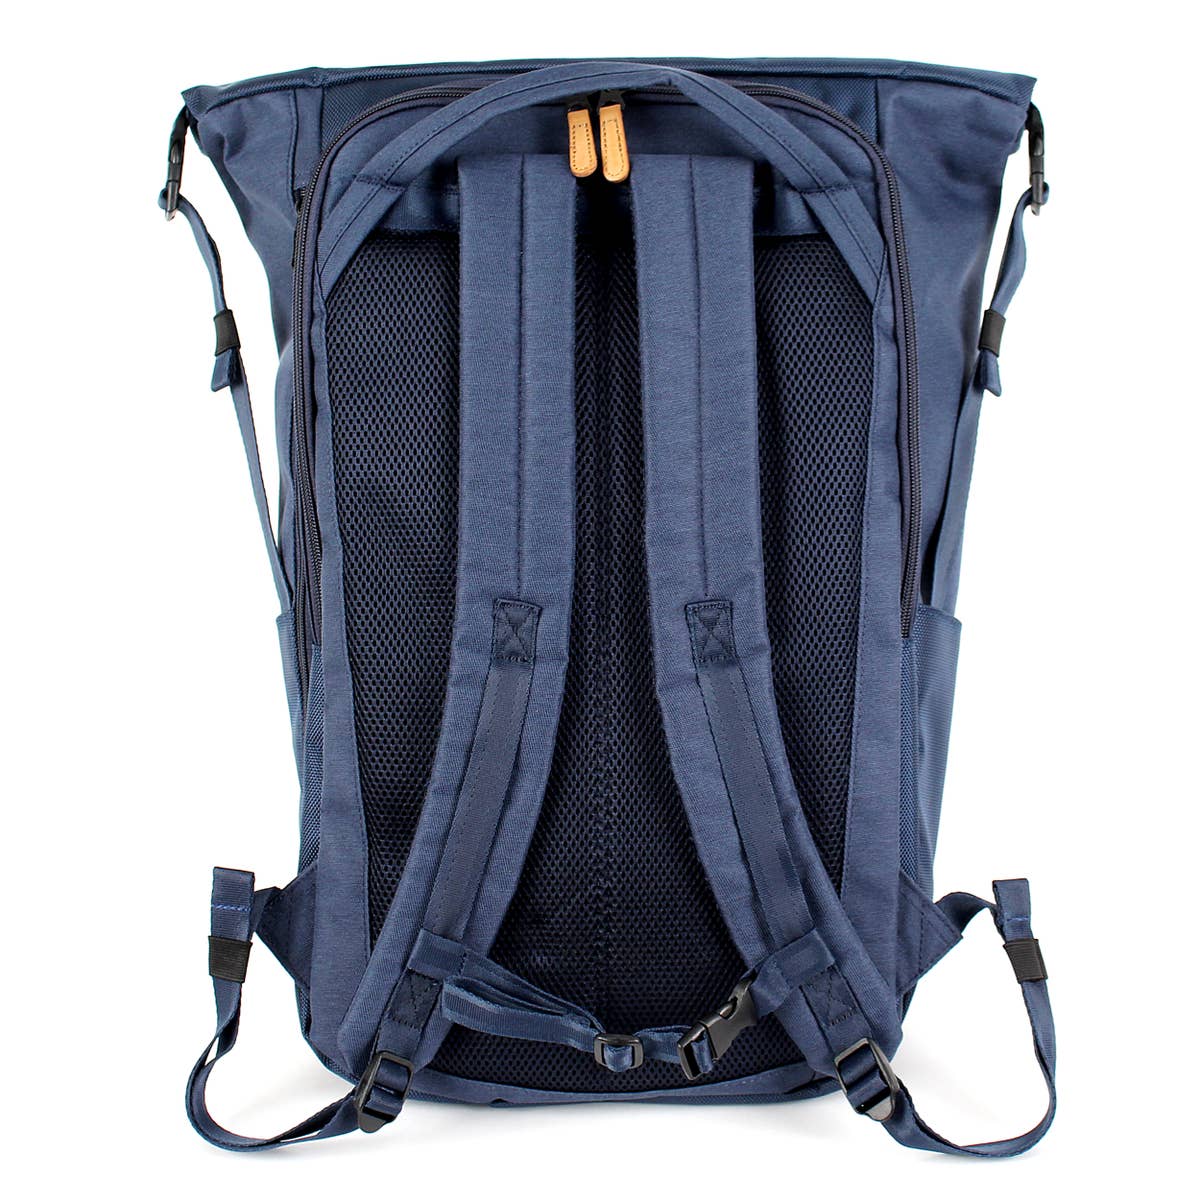 Harvest Label | Axis Travel Backpack with Roll Top Opening - Light Grey, Backpacks, Harvest Label, Defiance Outdoor Gear Co.